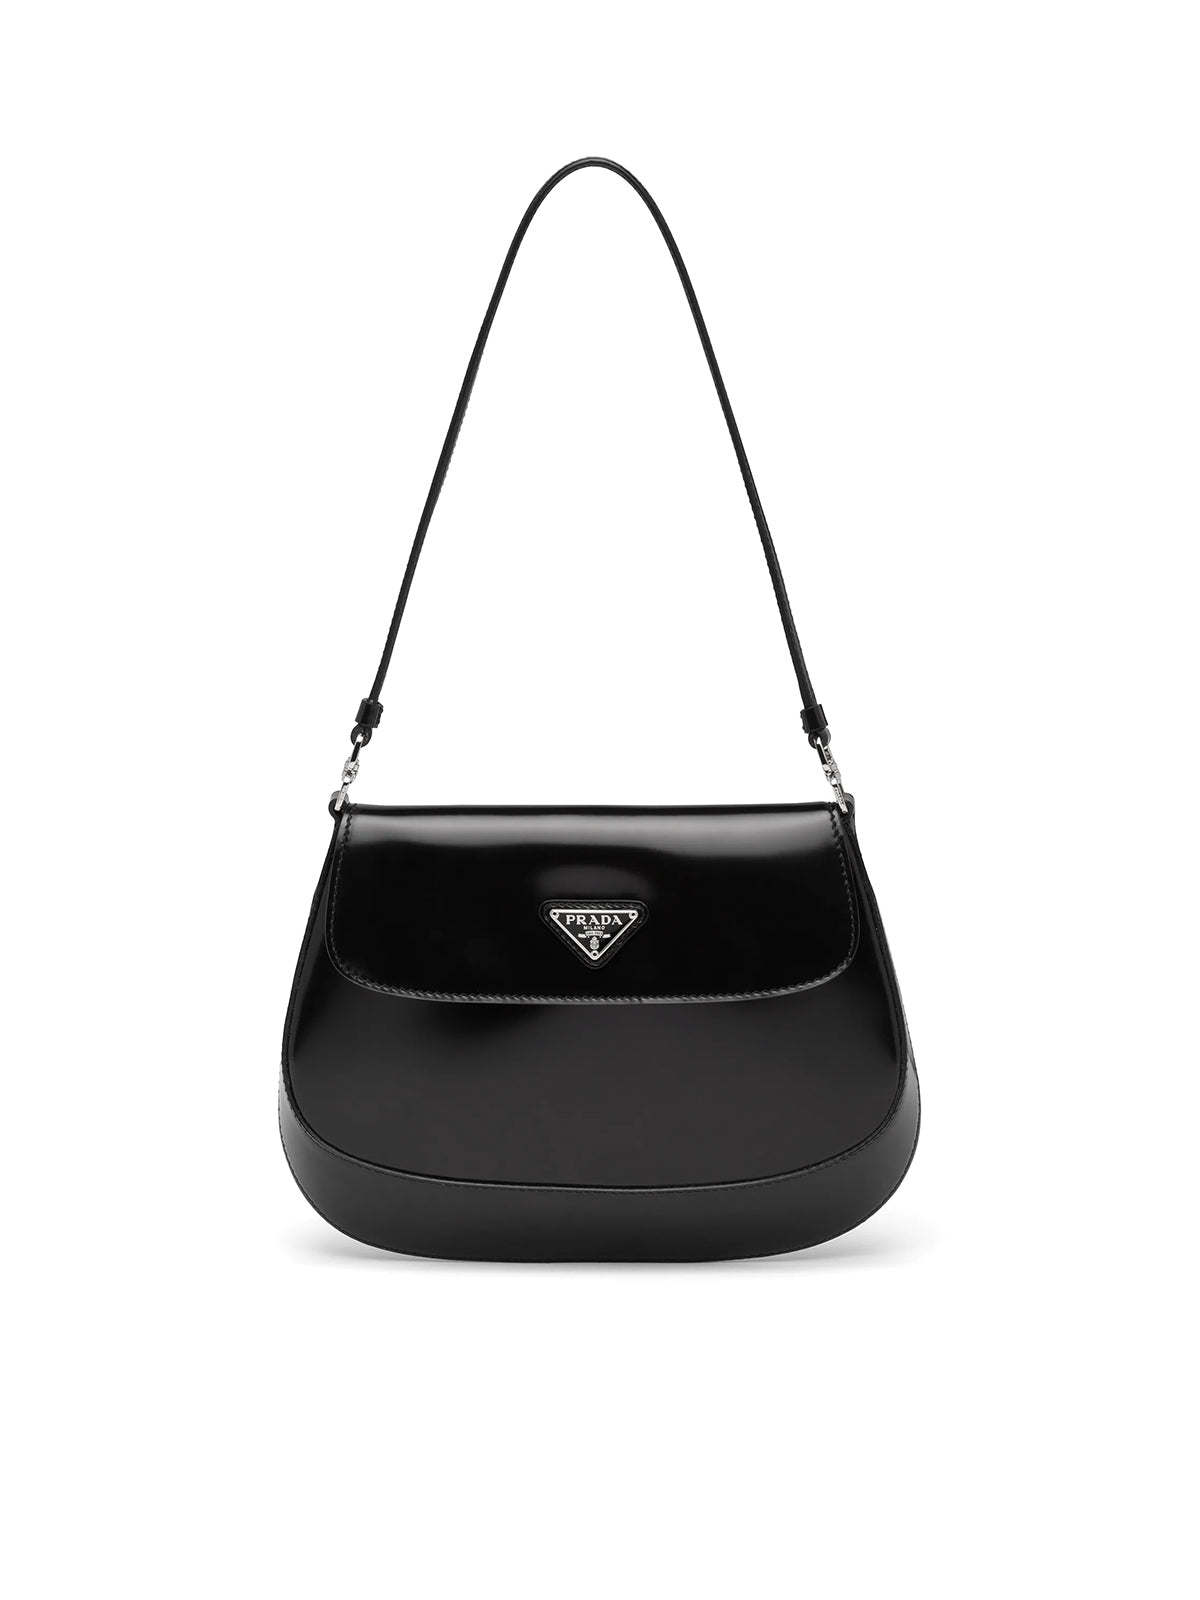 Cleo Small Leather Shoulder Bag in Red - Prada